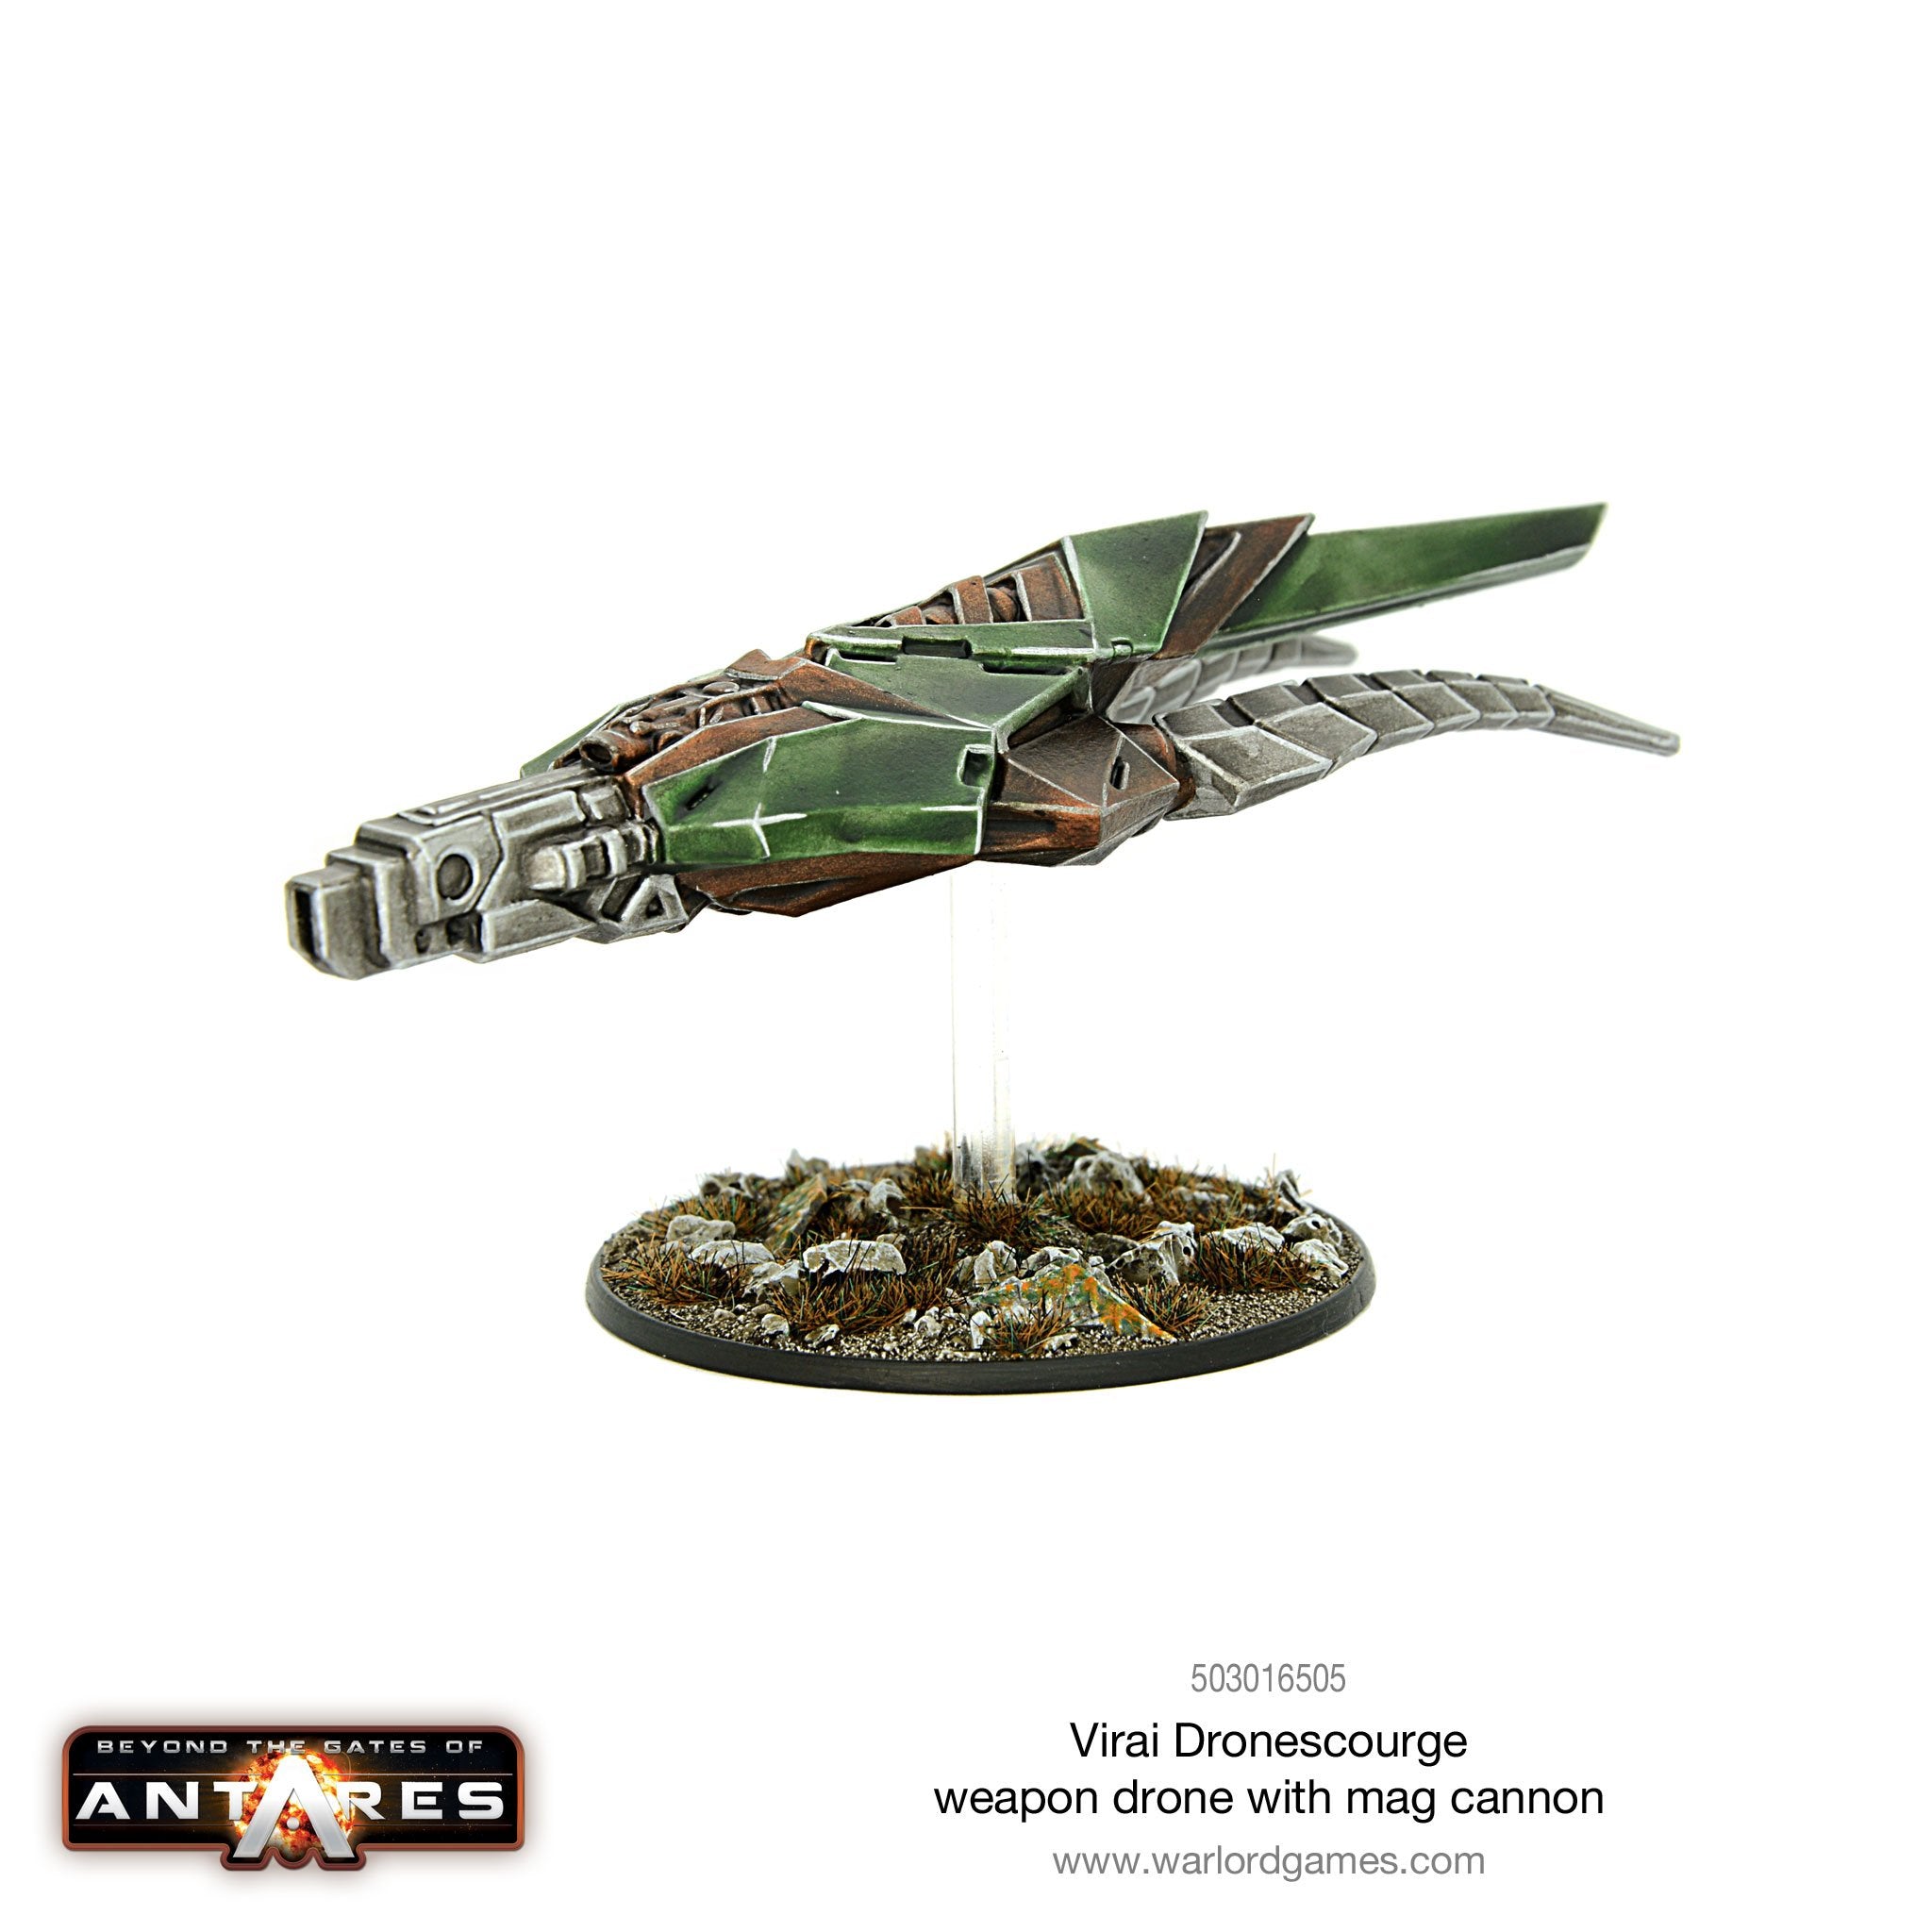 Virai Dronescourge weapon drone with mag cannon